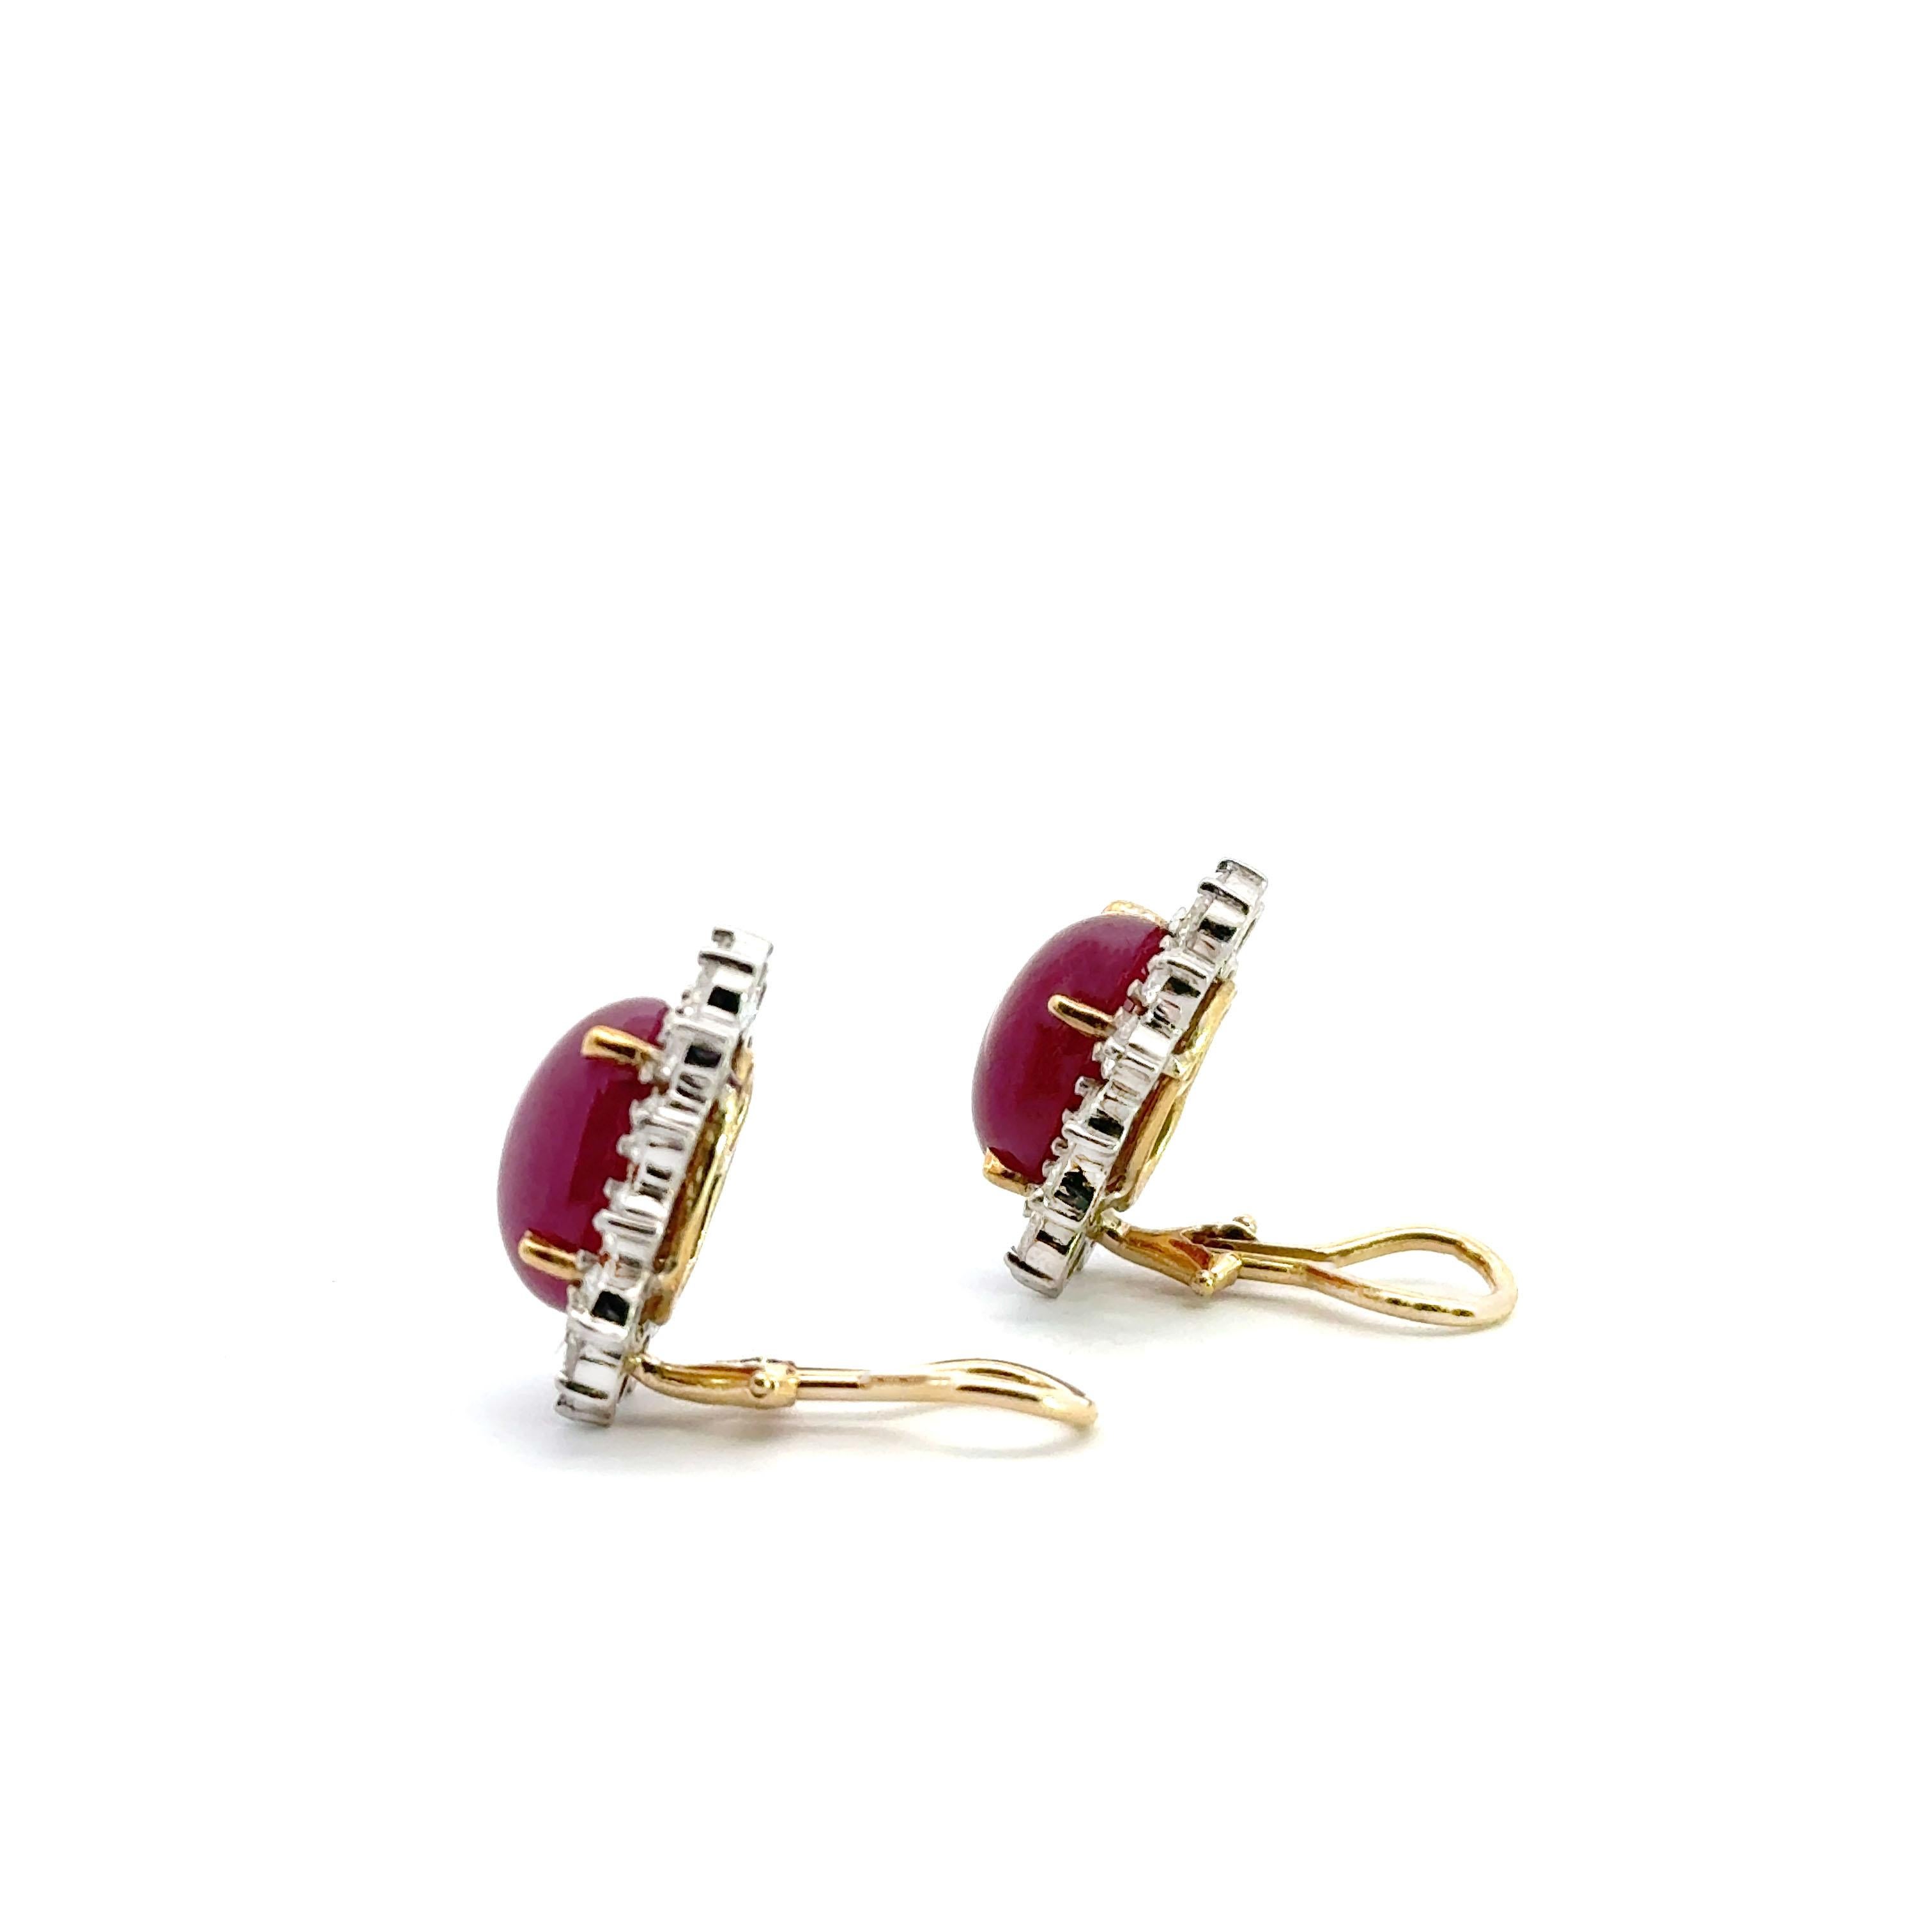 Preowned 14K yellow gold clip on button earrings featuring two oval shaped cabochon rubies measuring approximately 14.2x11mm and weighing approximately 15 carats total.  The rubies are surrounded by 25 round brilliant-cut diamonds weighing